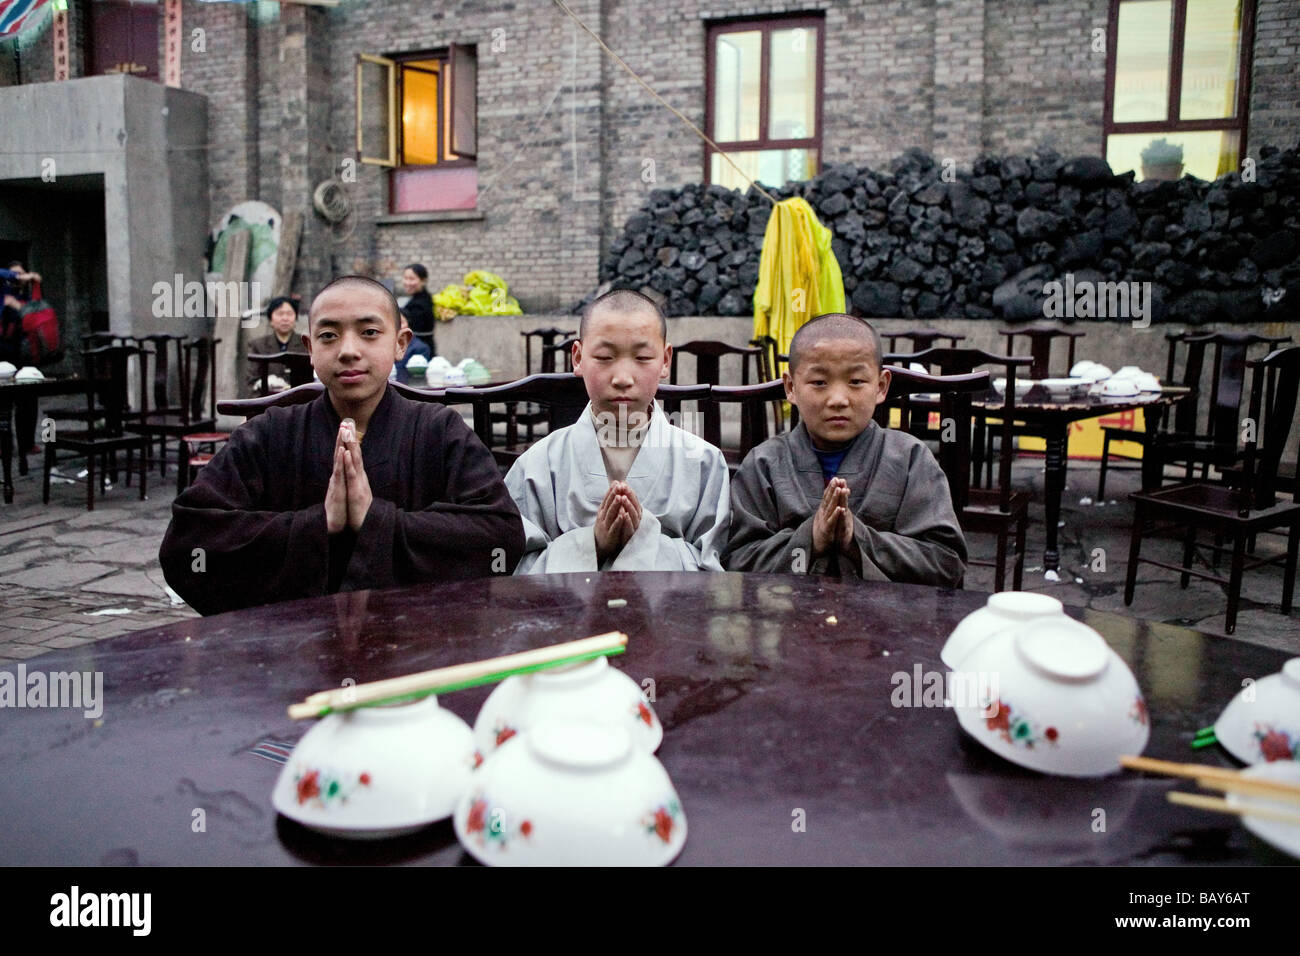 Young monks eating lunch, coal used cooking in the background, during birthday celebrations for Wenshu, Mount Wutai, Wutai Shan, Stock Photo